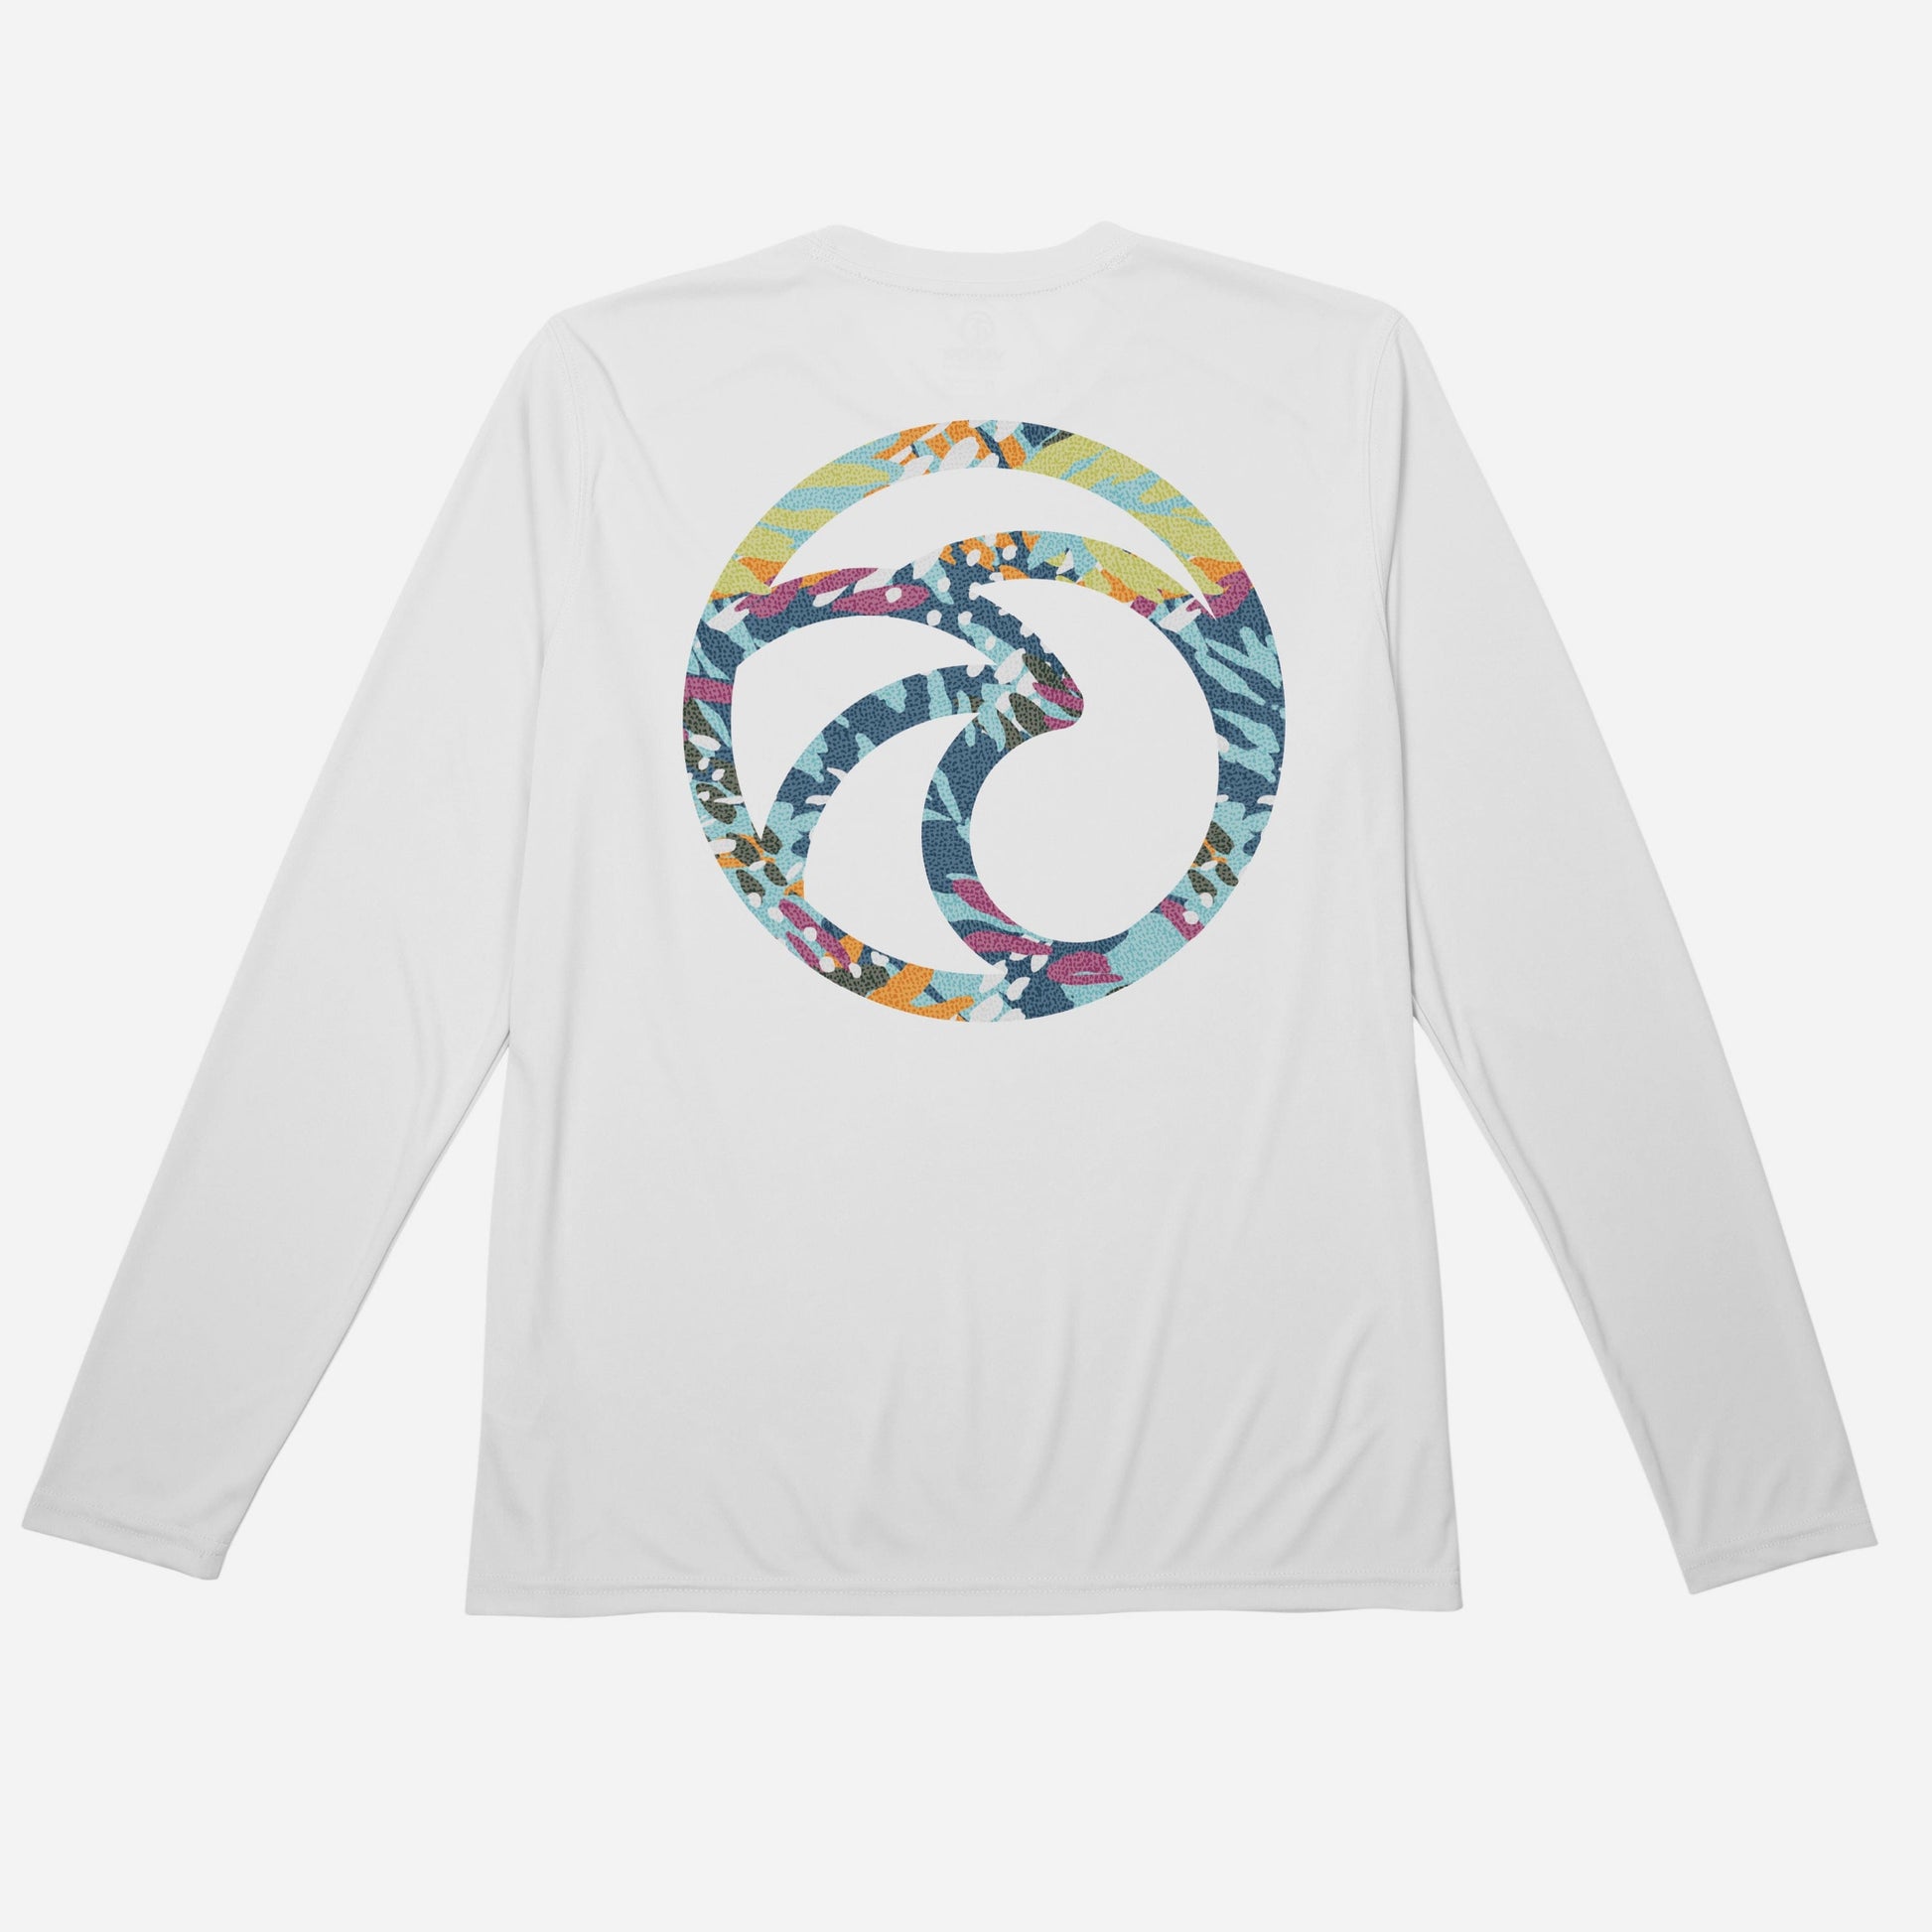 All Day Wave - Long Sleeve UPF 50 Surf T-Shirt for Men